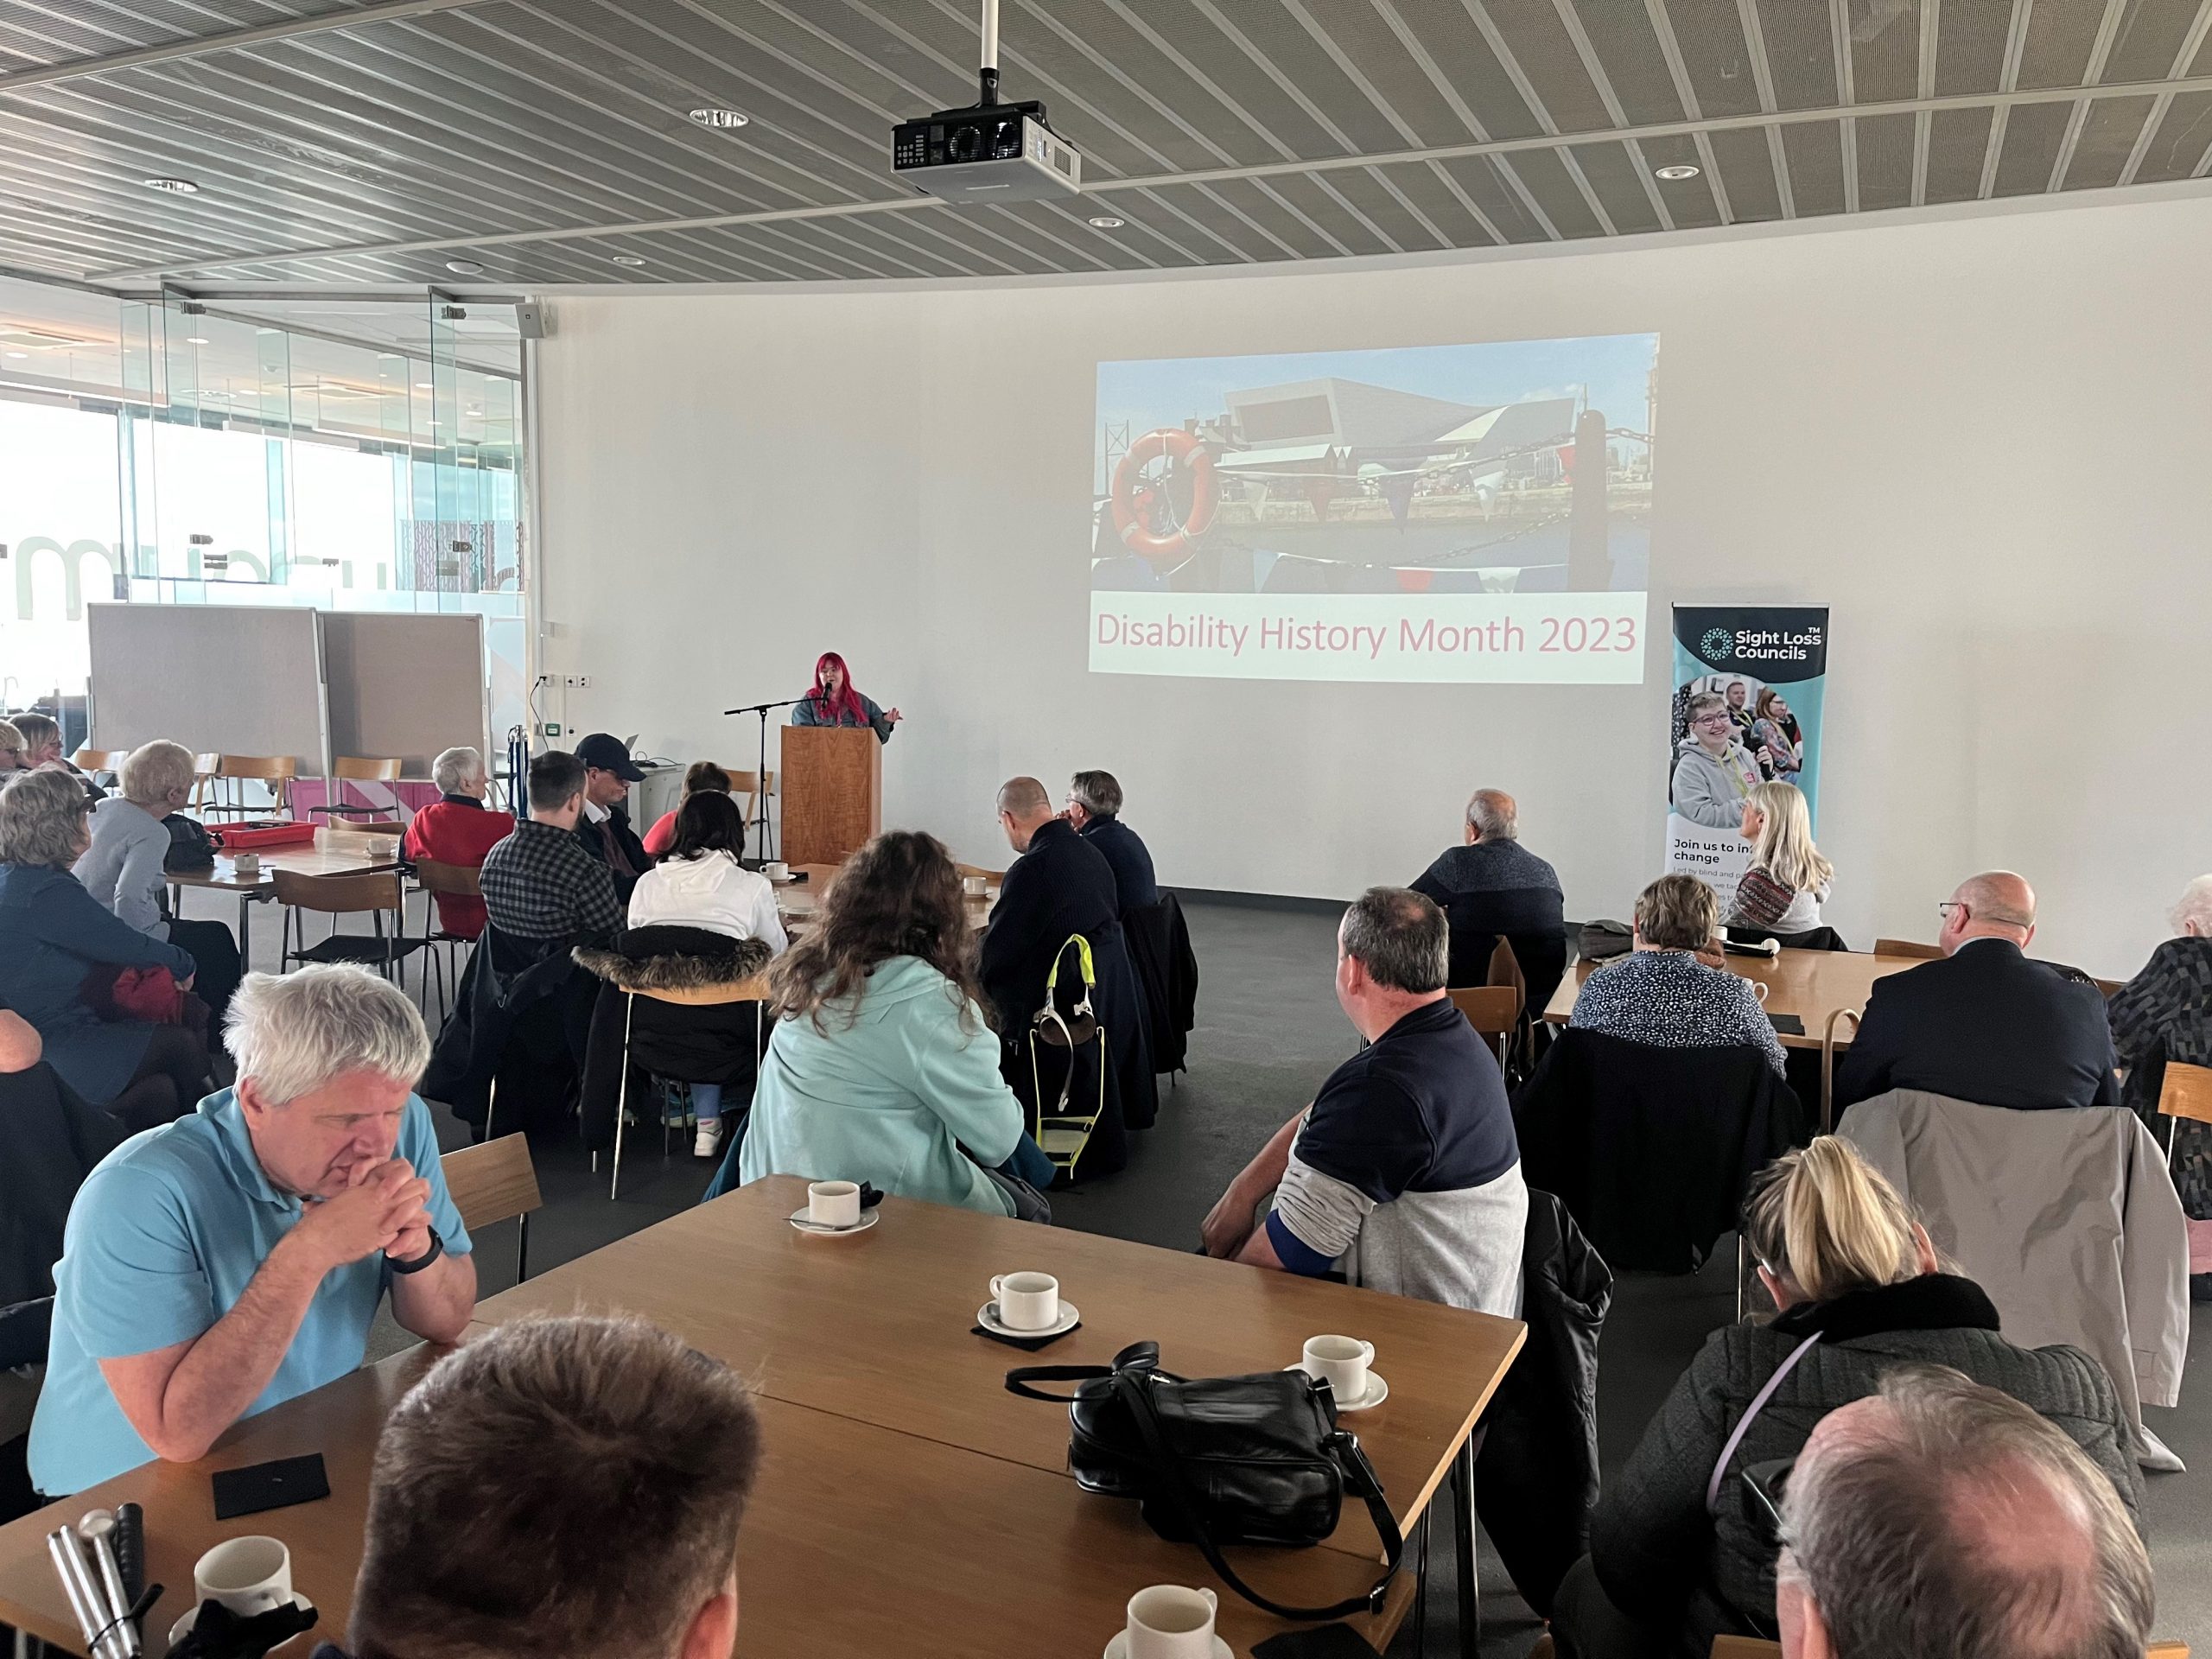 Blind and partially sighted delegates are sat around tables listening to a key speaker at the event. A presentation slide says ‘Disability Awareness Month’ 2023 and there is a Sight Loss Council banner in the background.